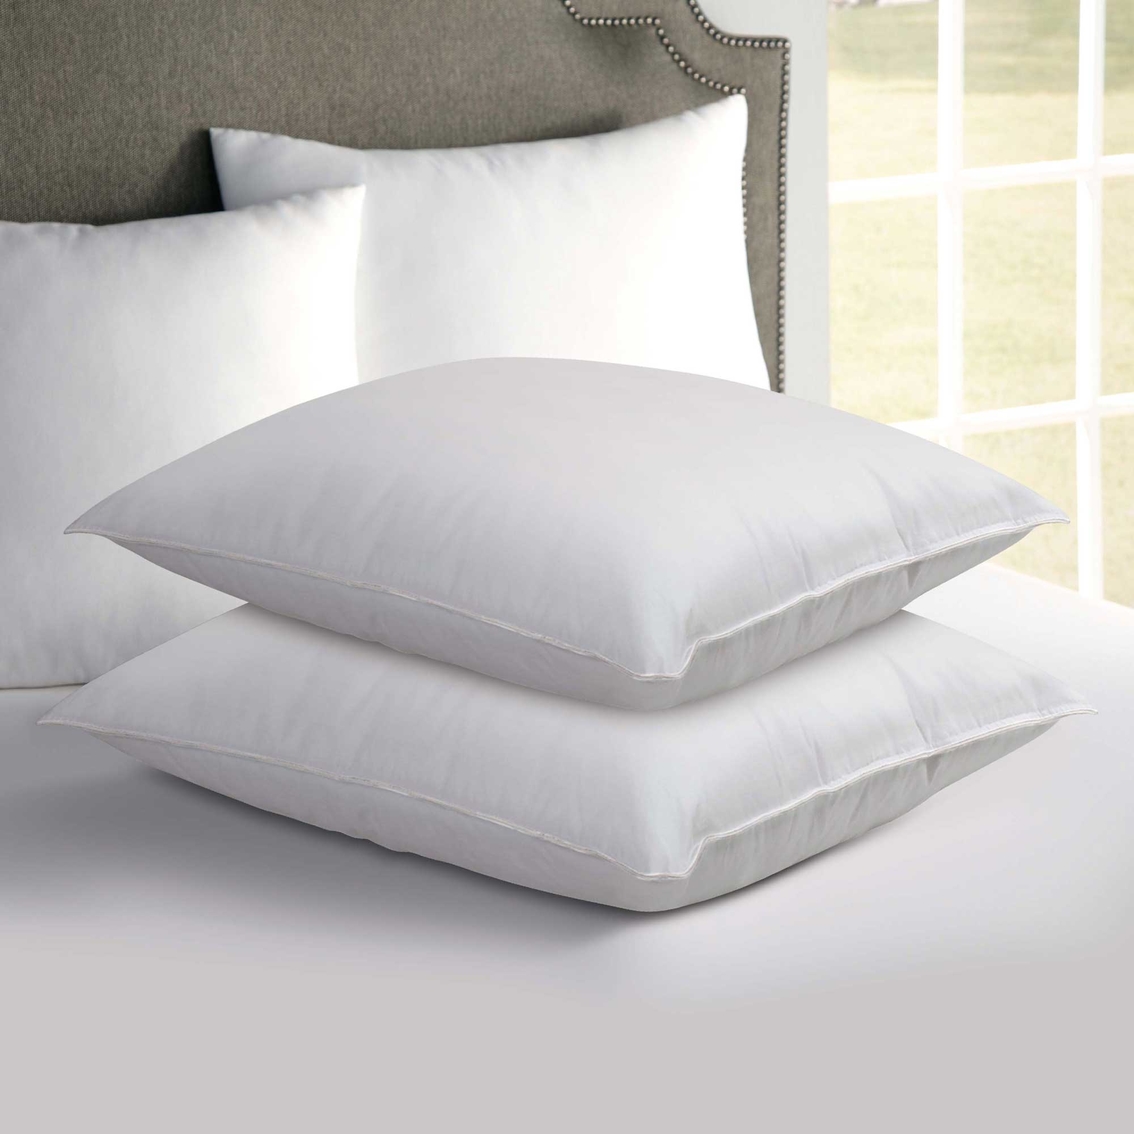 Rio Home Fashions PermaLoft Never Goes Flat Gel Pillow - Image 2 of 4